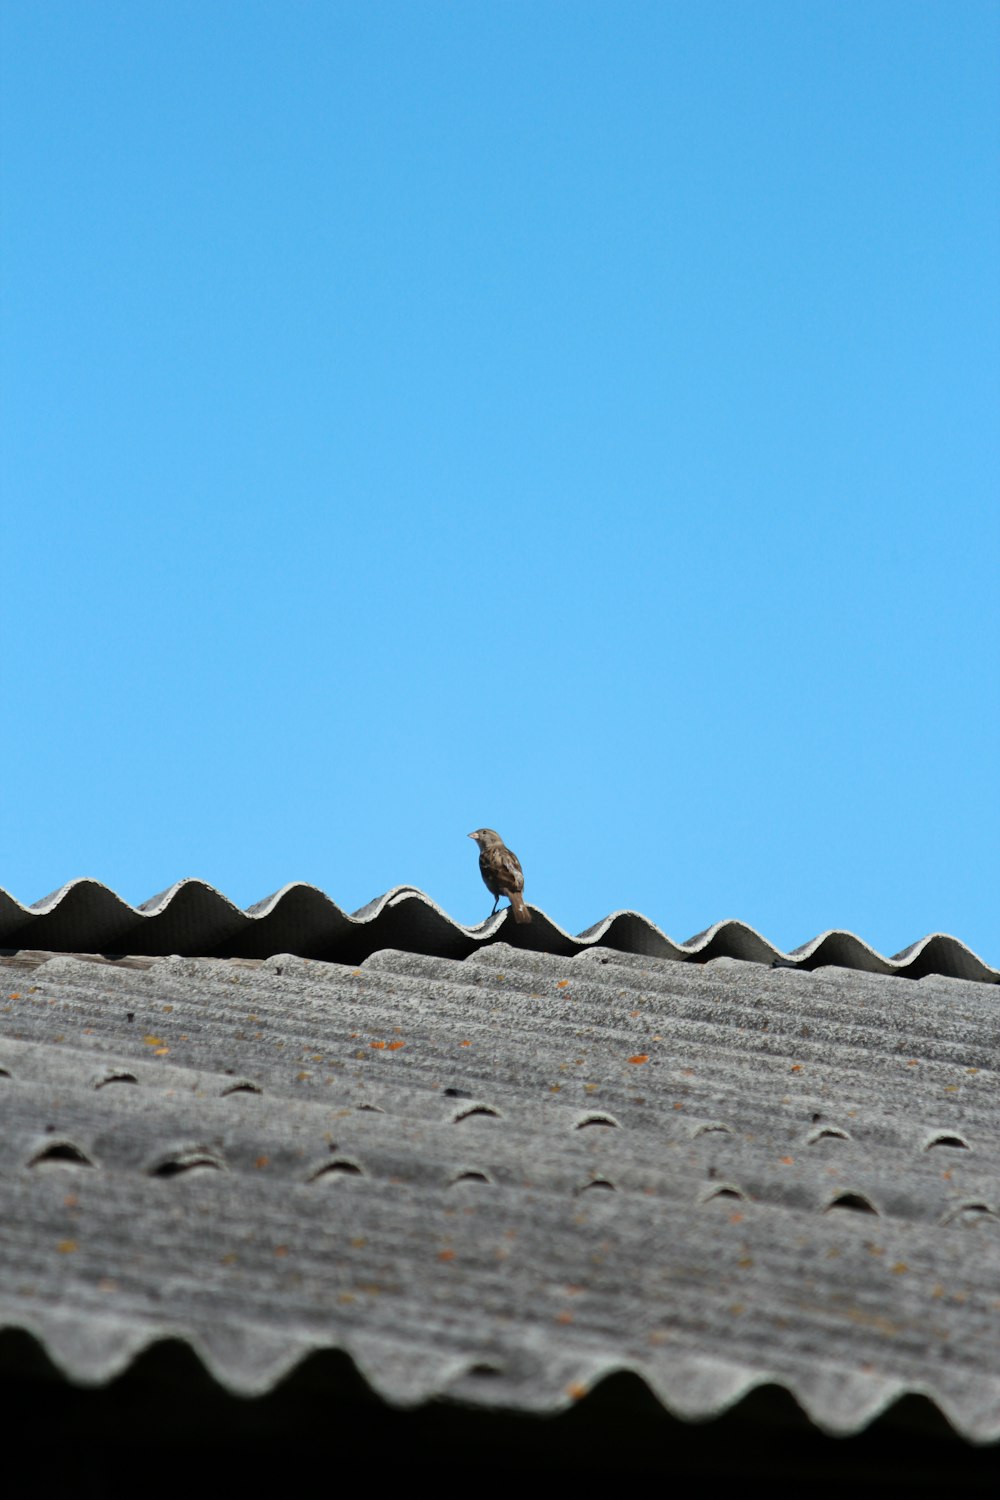 a small bird sitting on top of a roof